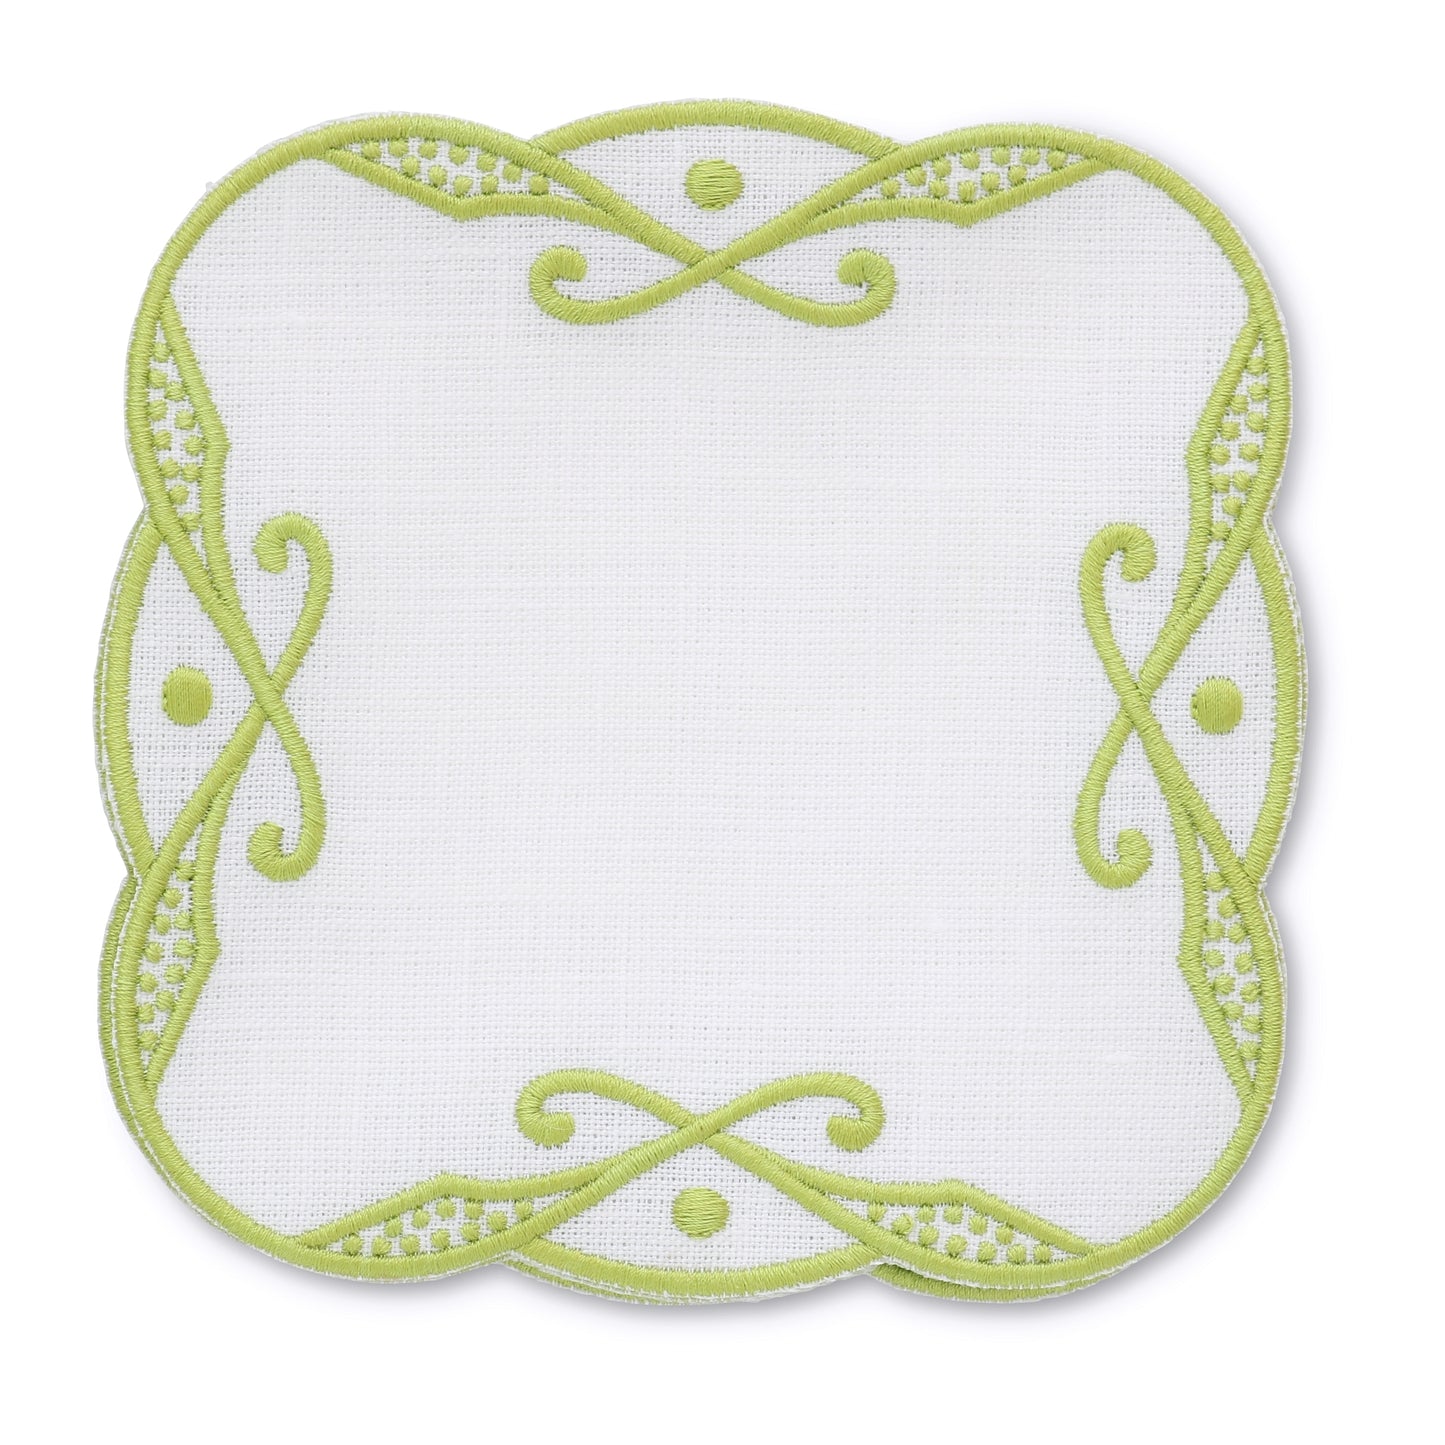 Made to order Charlotte Embroidered Edge Linen Cocktail Napkins (set of 4)